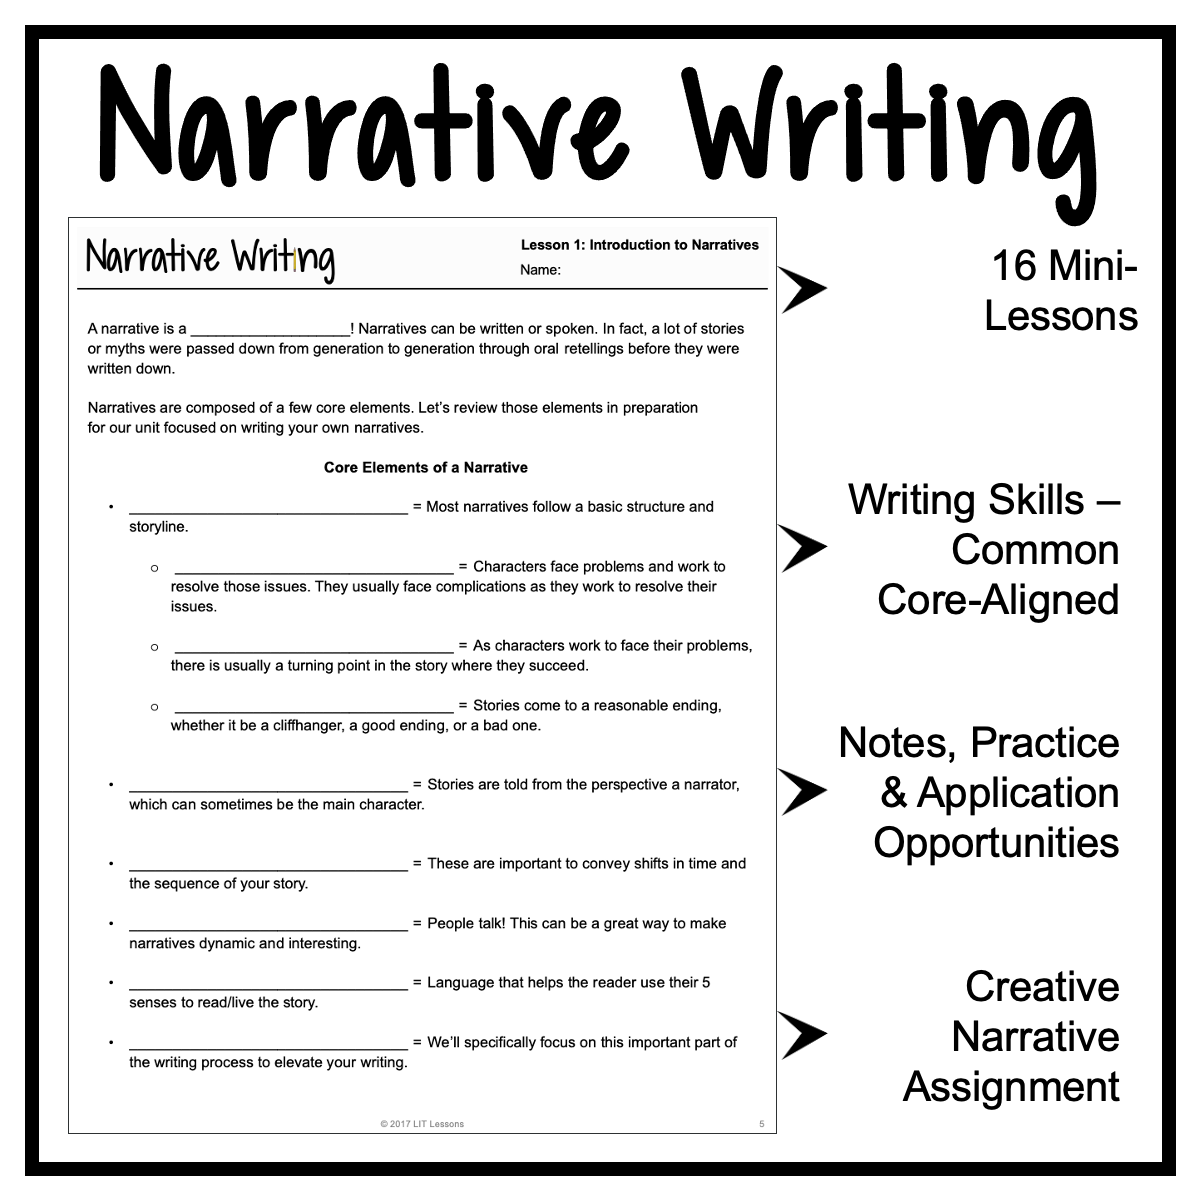 Narrative Writing Lessons for Grades 6-8 | LIT Lessons